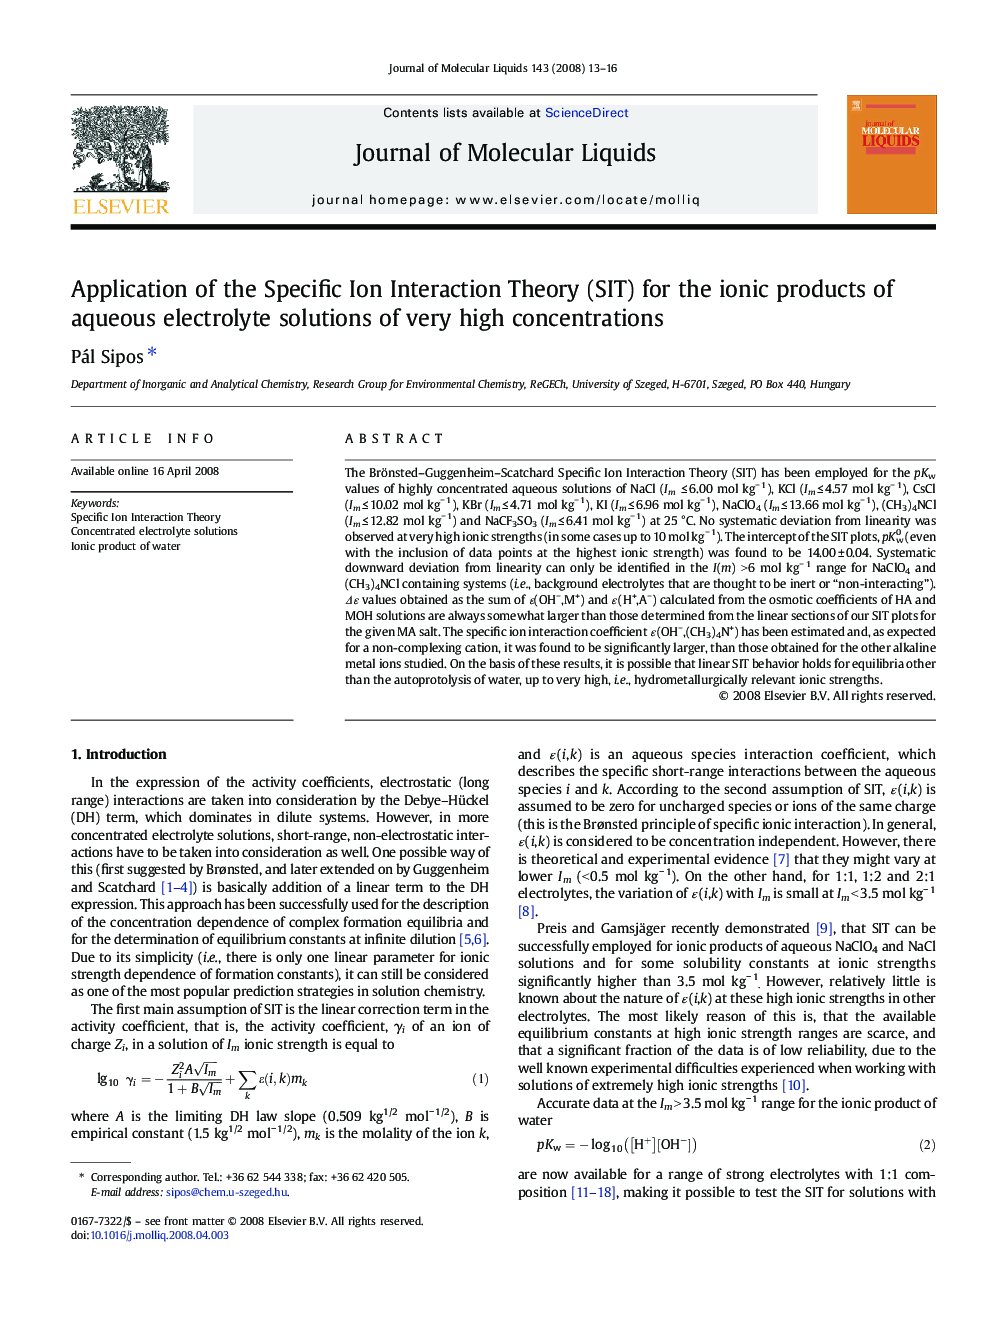 Application of the Specific Ion Interaction Theory (SIT) for the ionic products of aqueous electrolyte solutions of very high concentrations